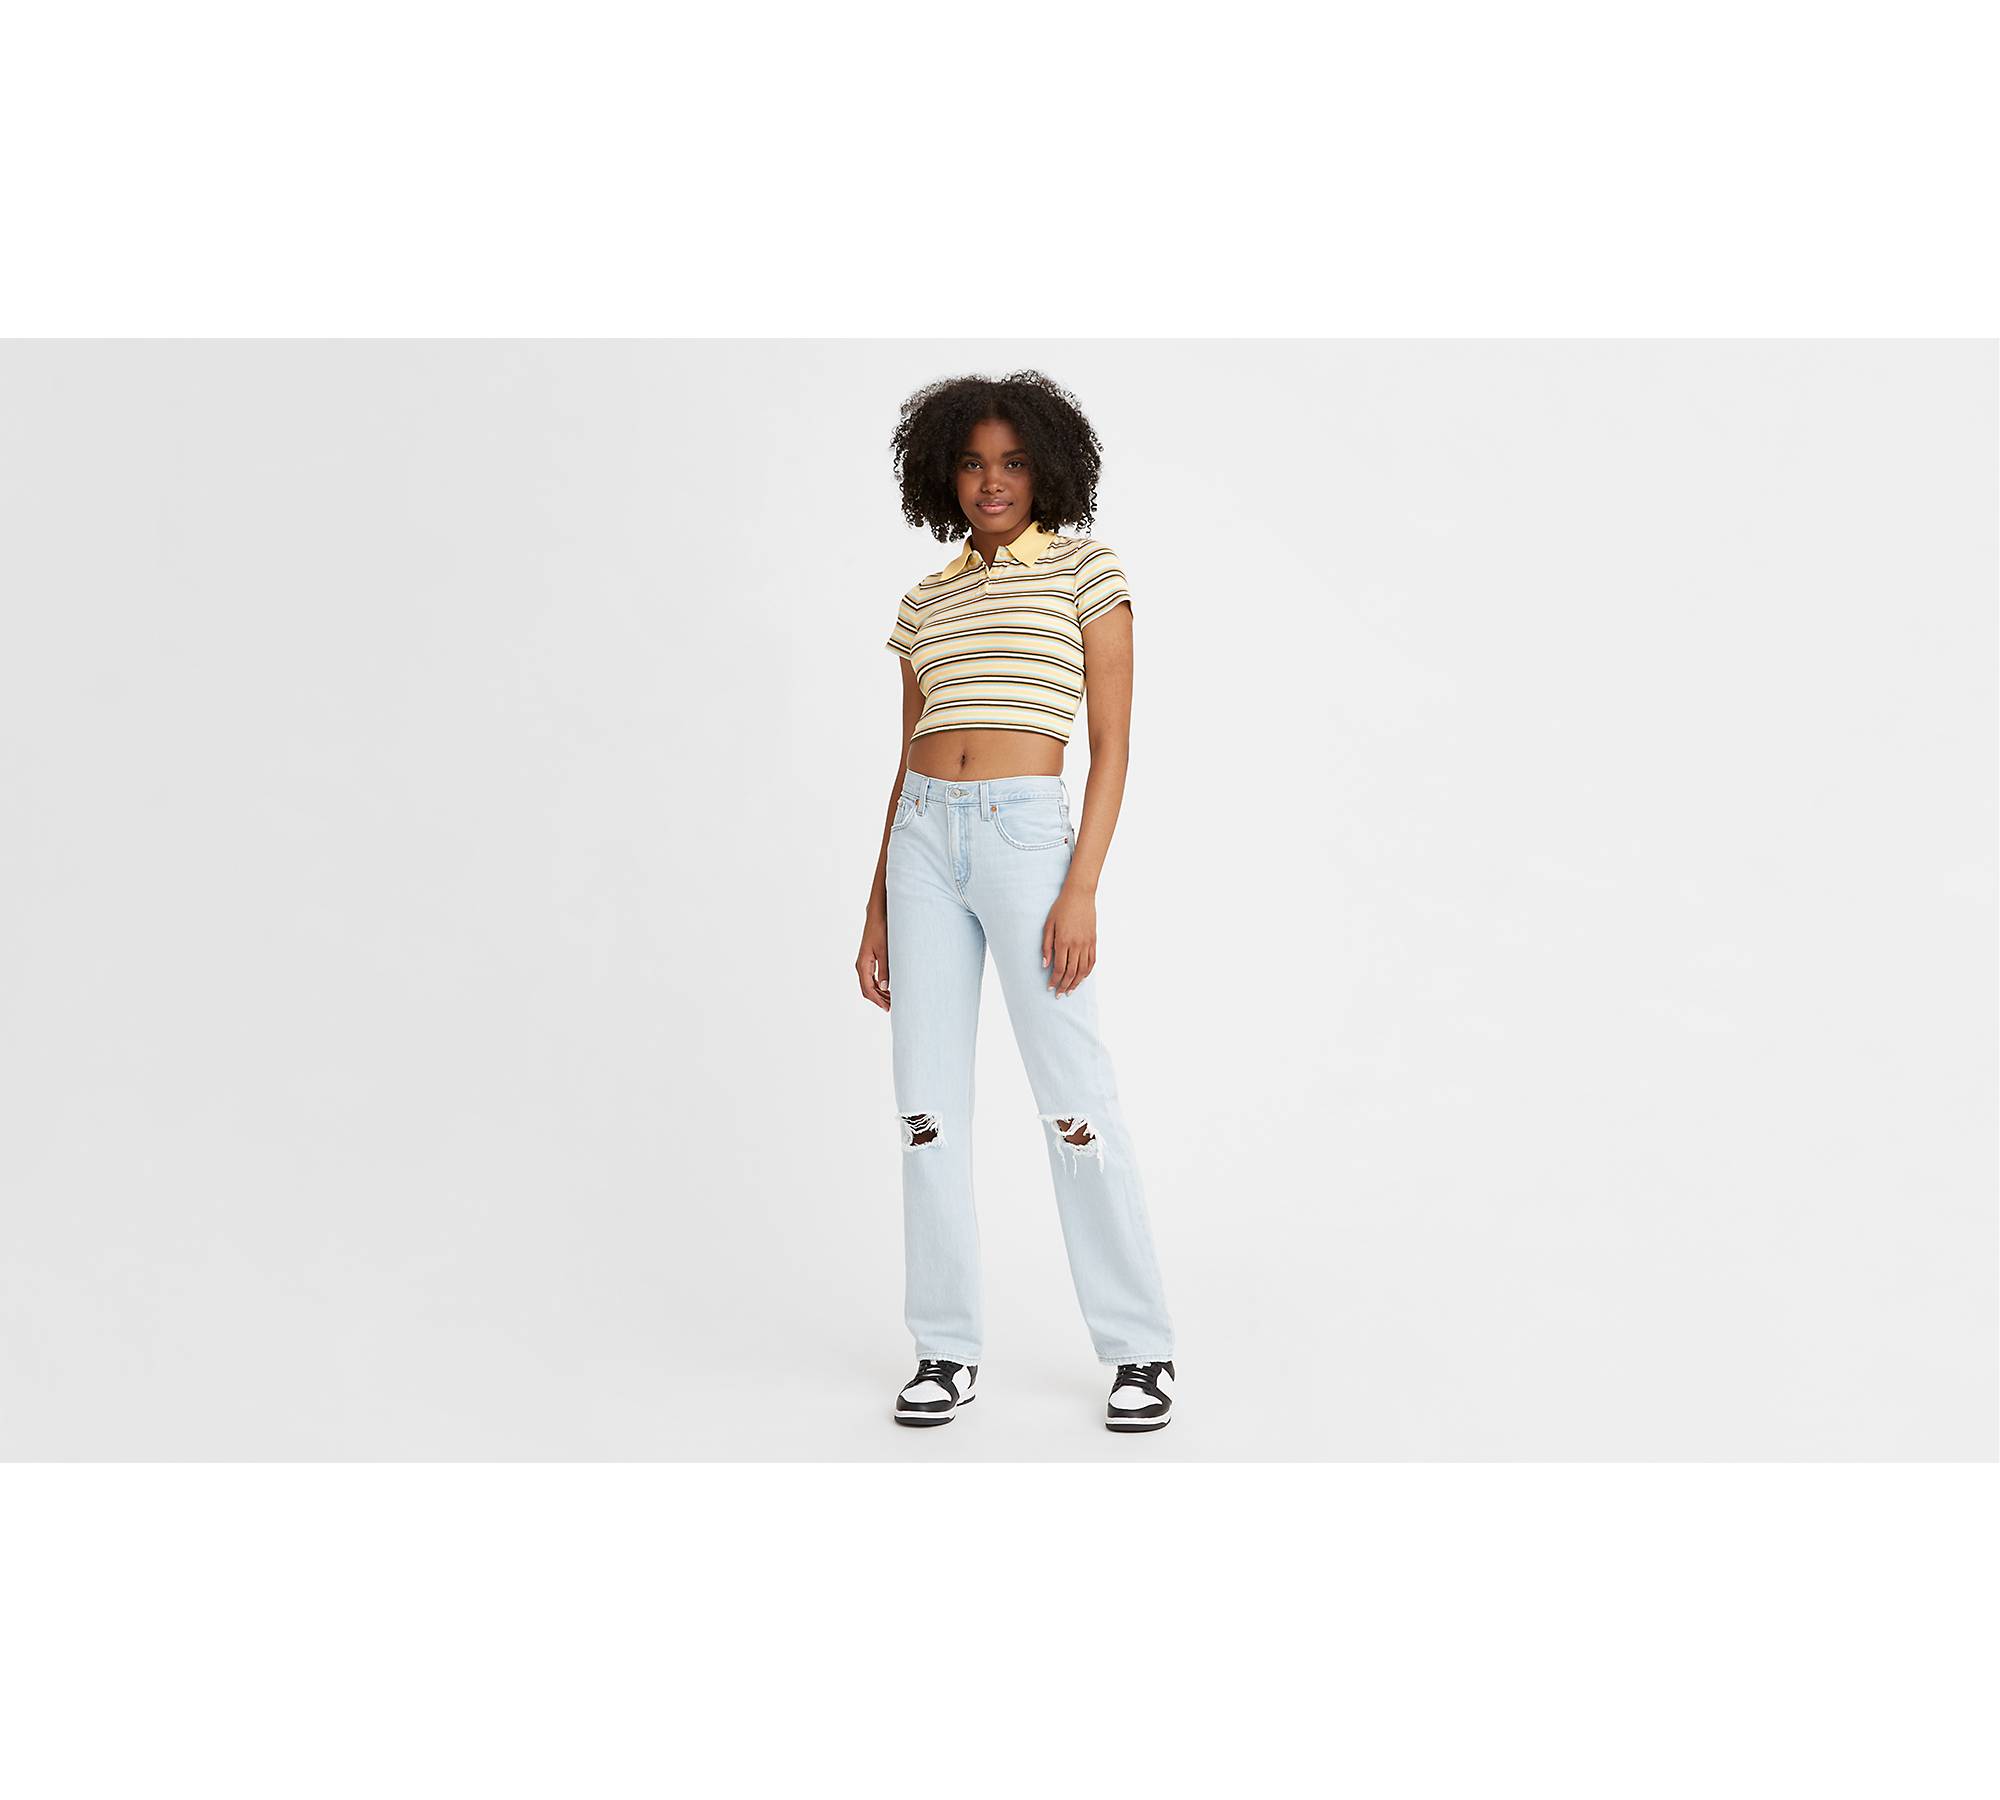 LEVI'S Low Pro Womens Jeans - Charlie Glow Up